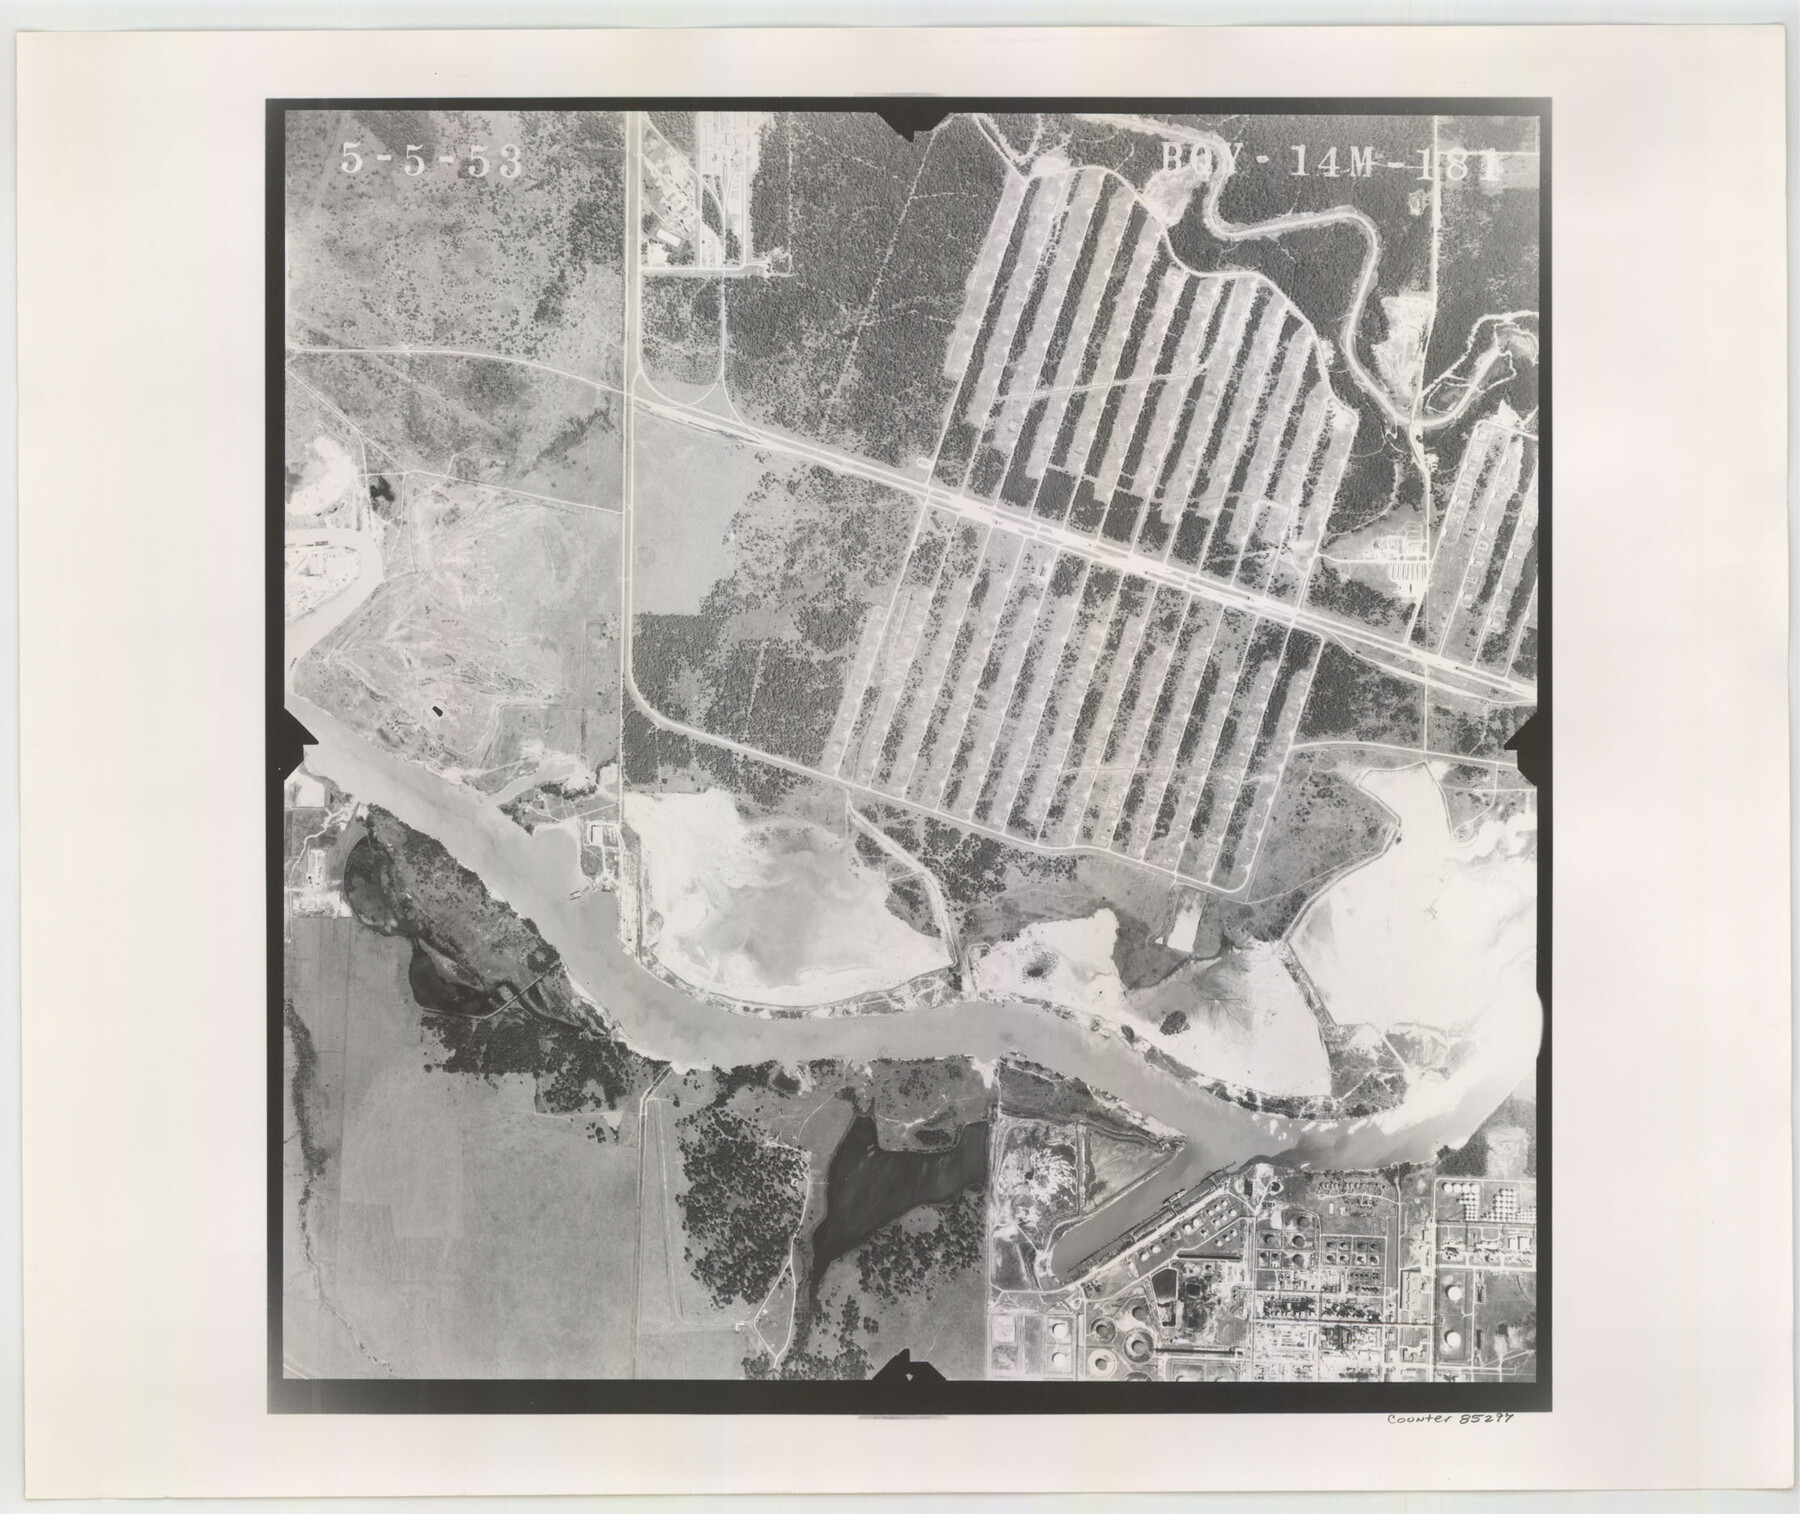 85297, Flight Mission No. BQY-14M, Frame 181, Harris County, General Map Collection